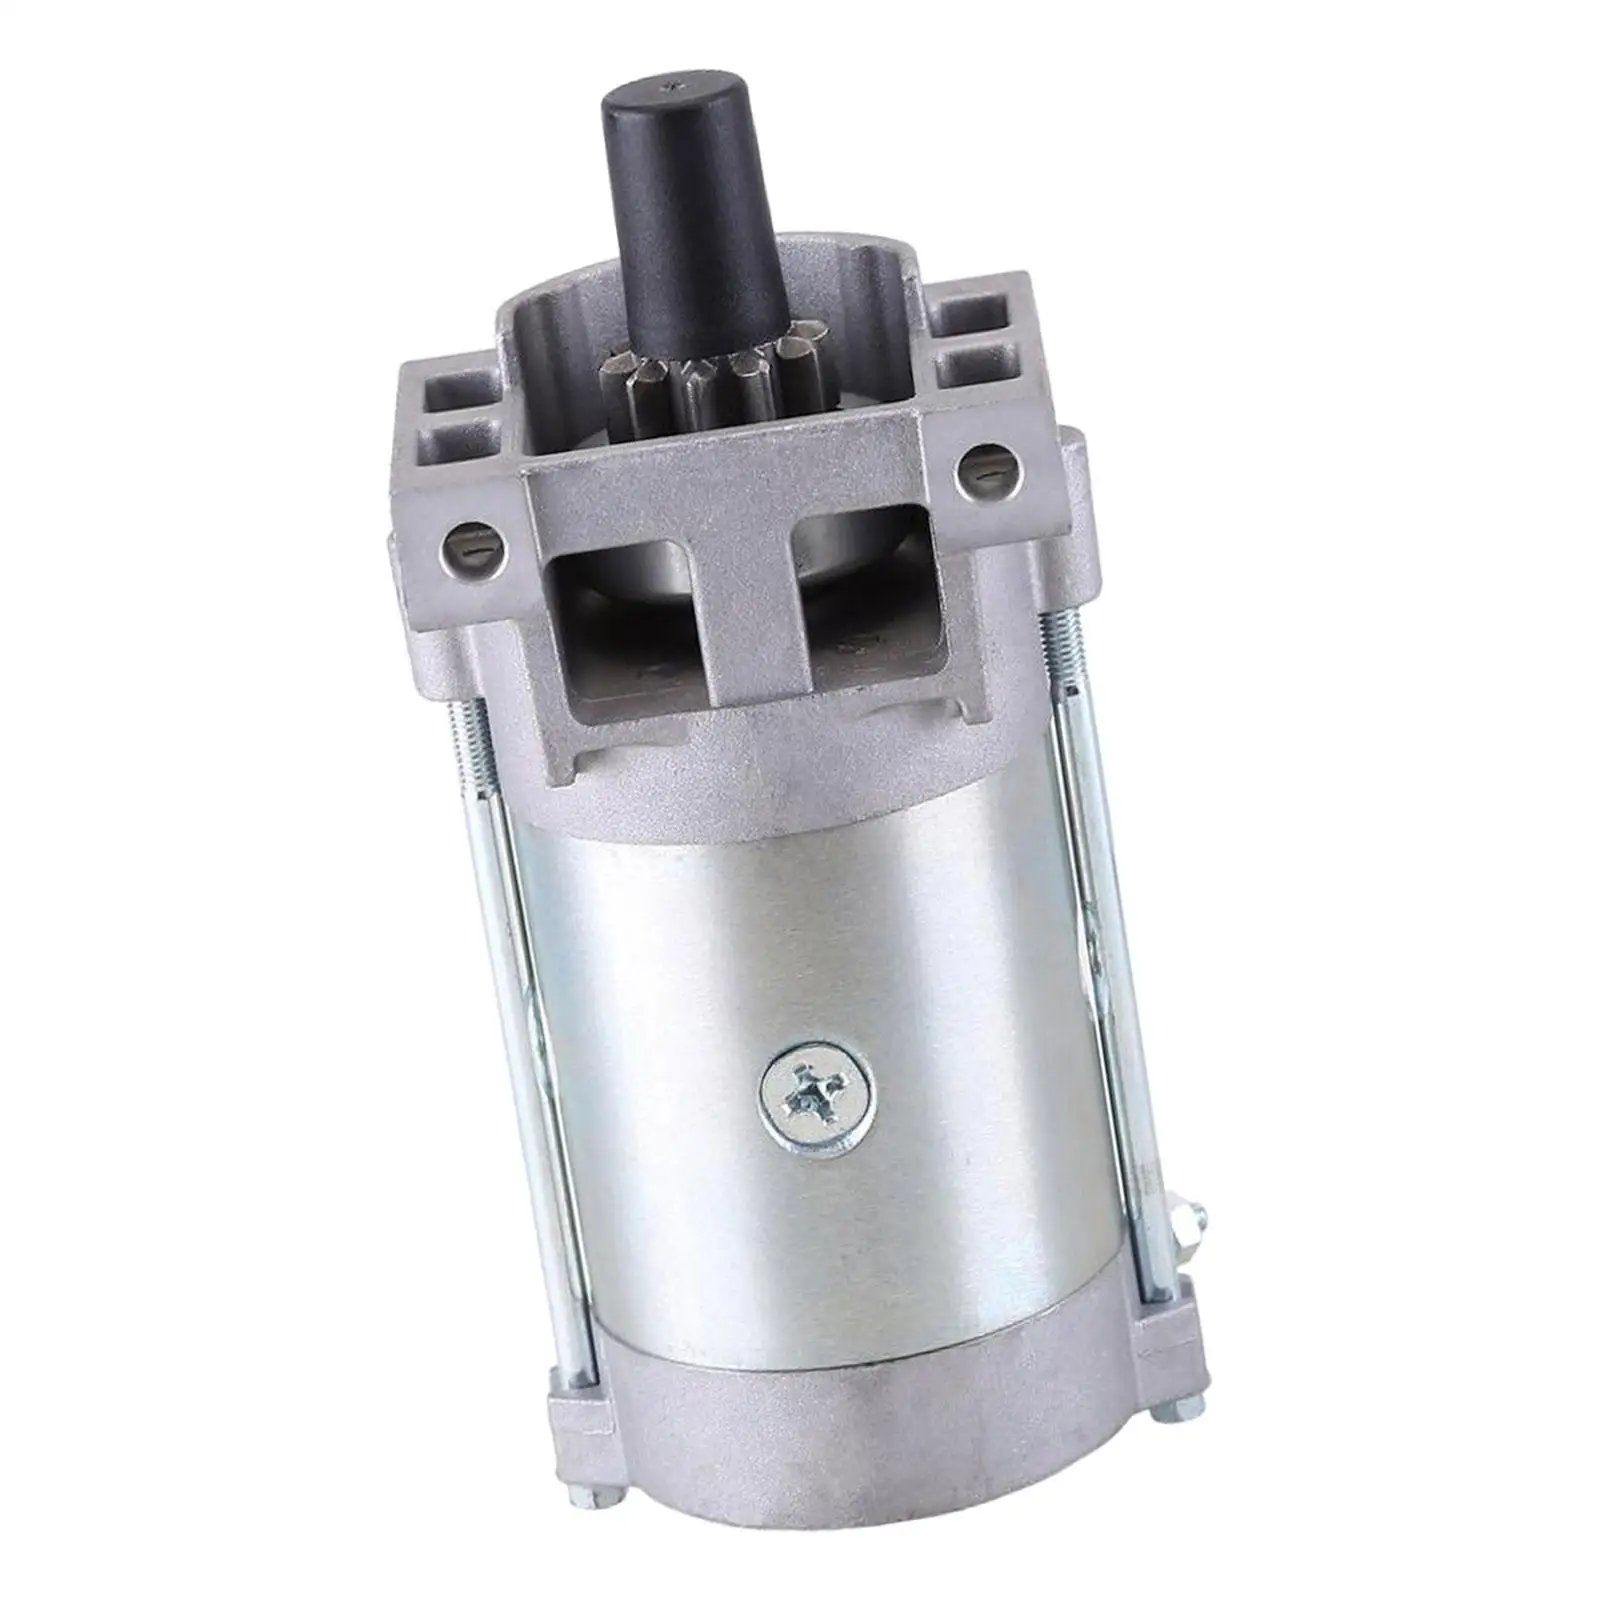 Starter Motor Replaces Easy to Install High Performance Professional Motors Starter Parts 270360054-0001 2703600540001 21110533